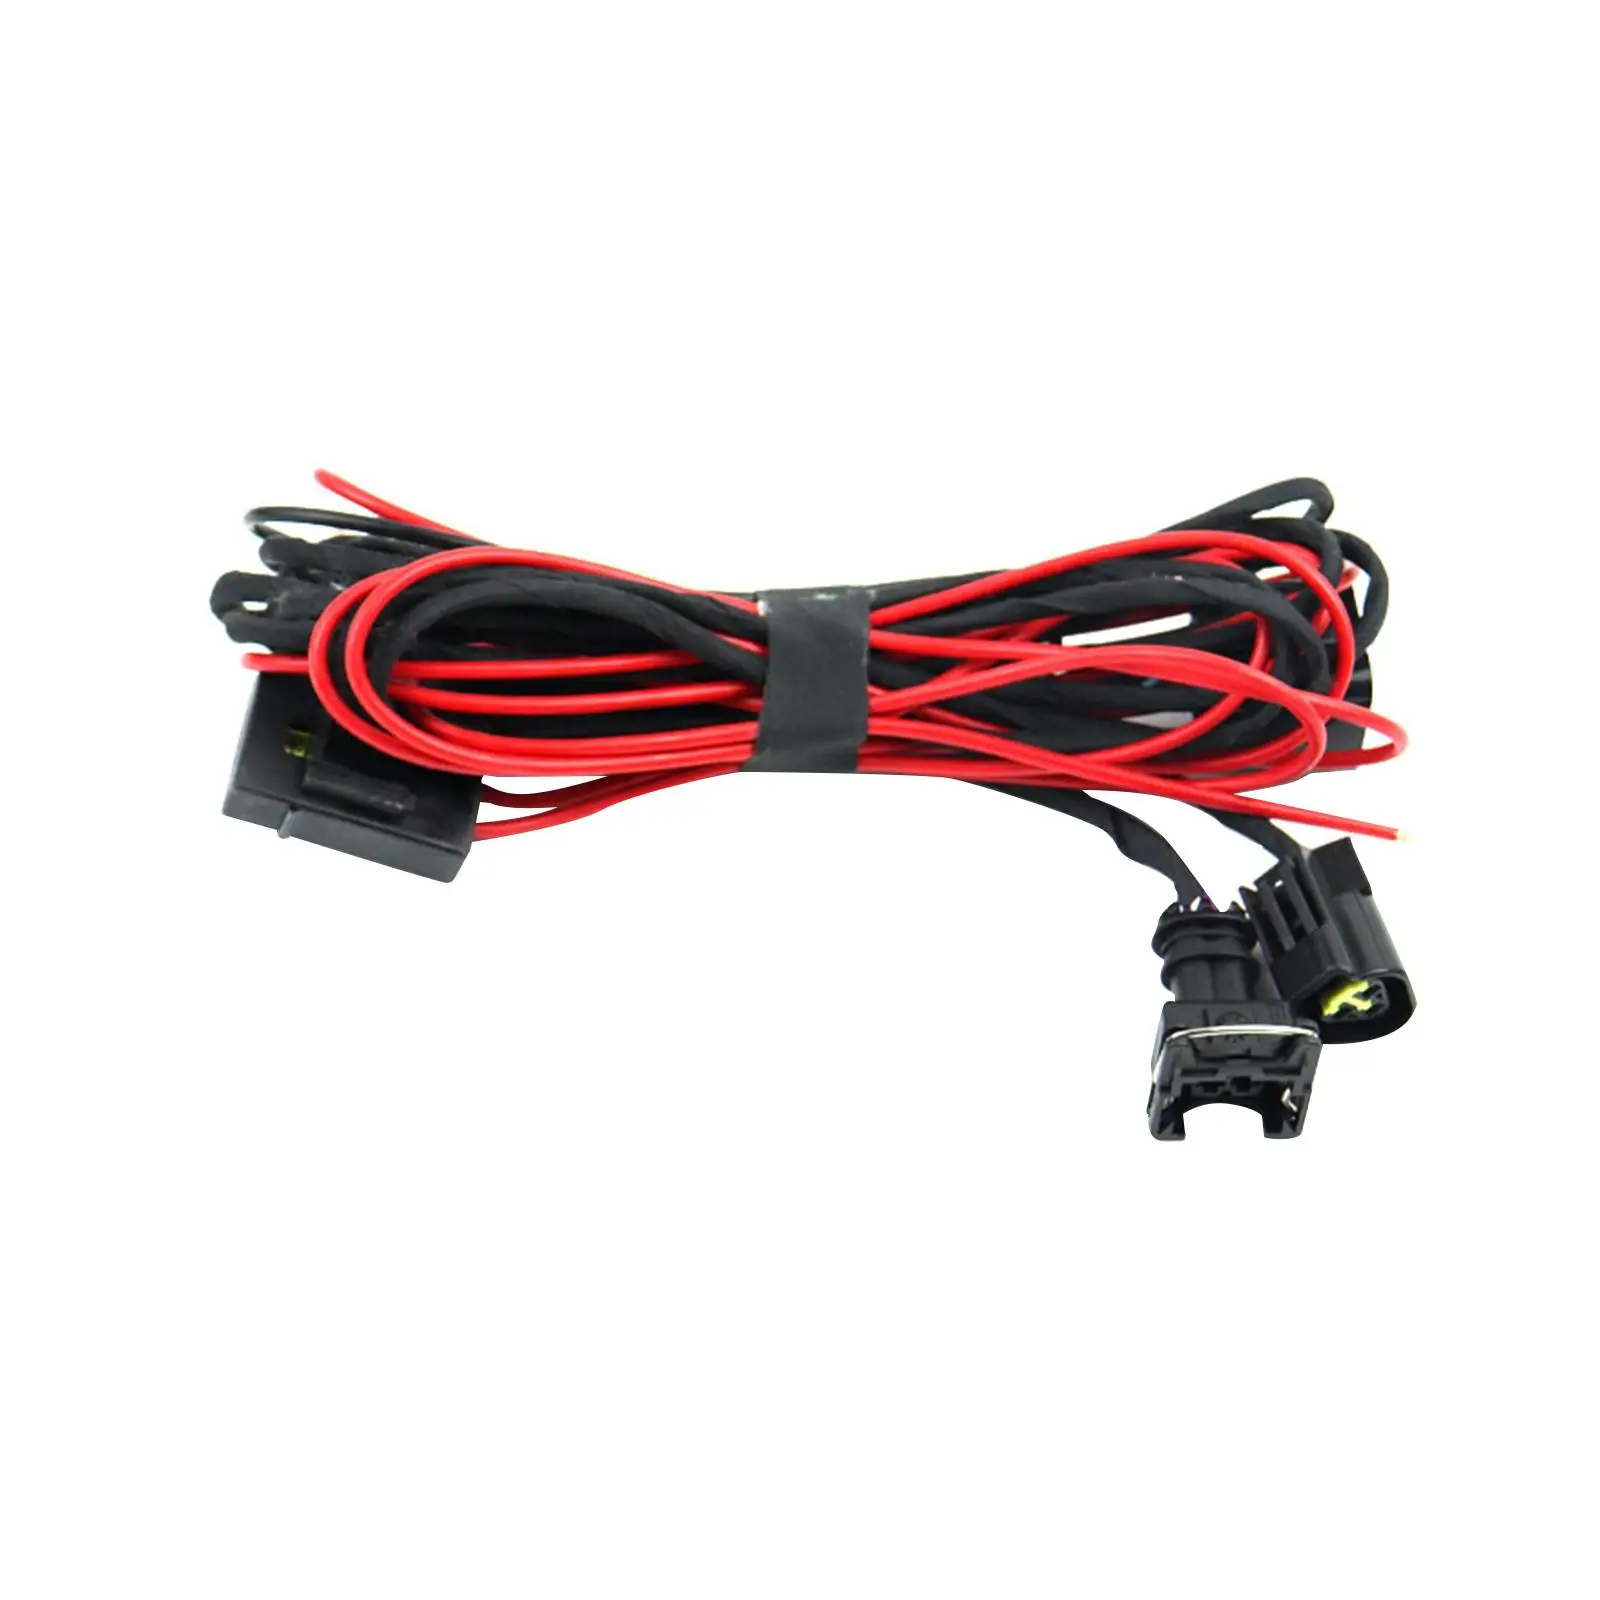 Heater Harness Replacement Car Truck Heater Parts Assembly for Lorries Caravans Campers Car Parking Diesel Air Heater